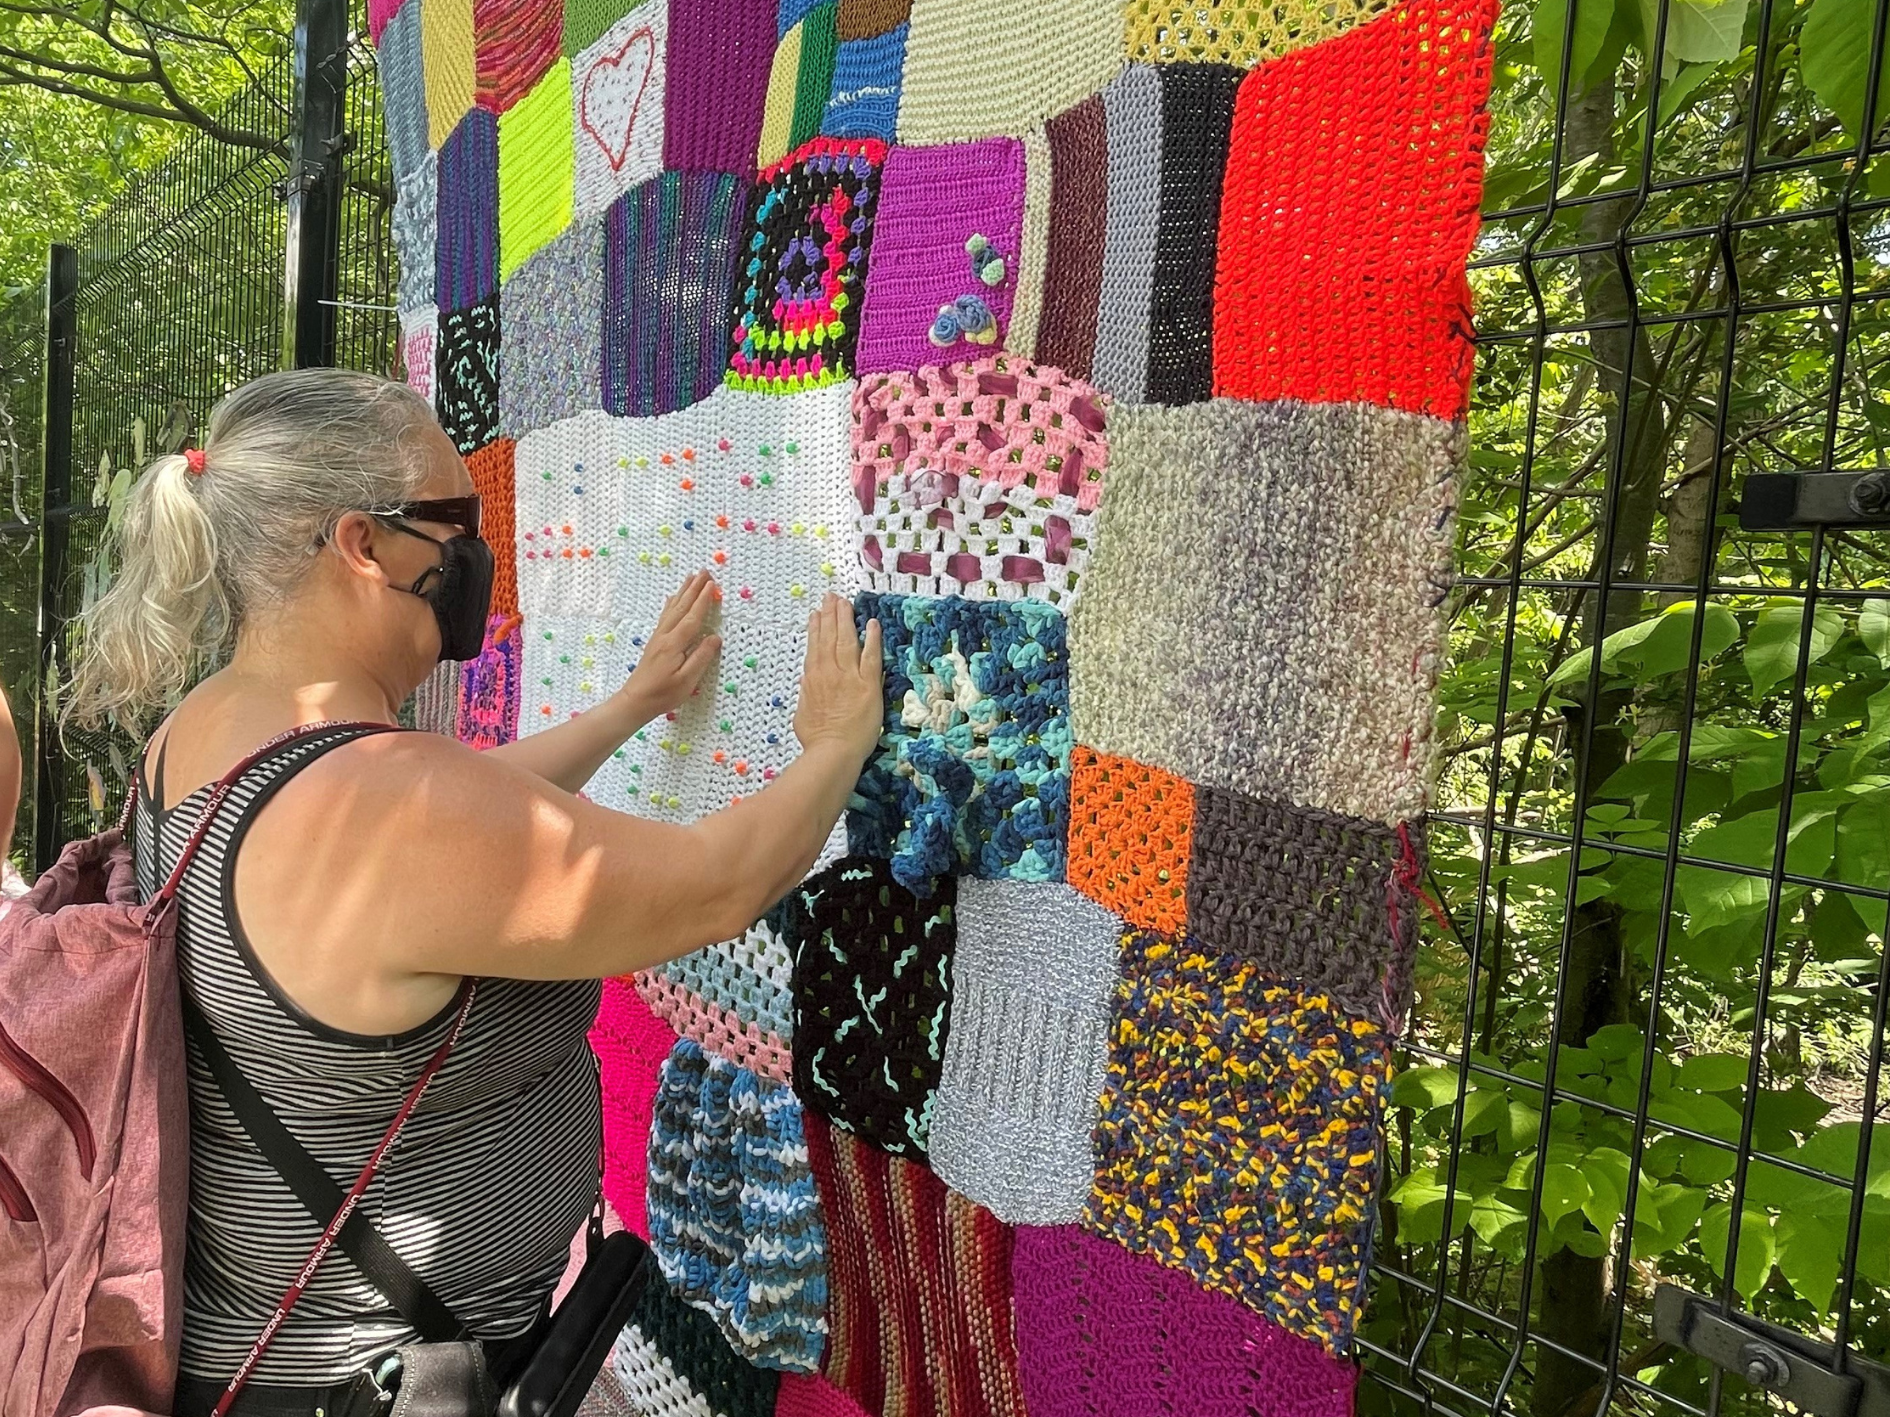 A client uses her hands to feel the tactile yarn bombing display in Missisauga